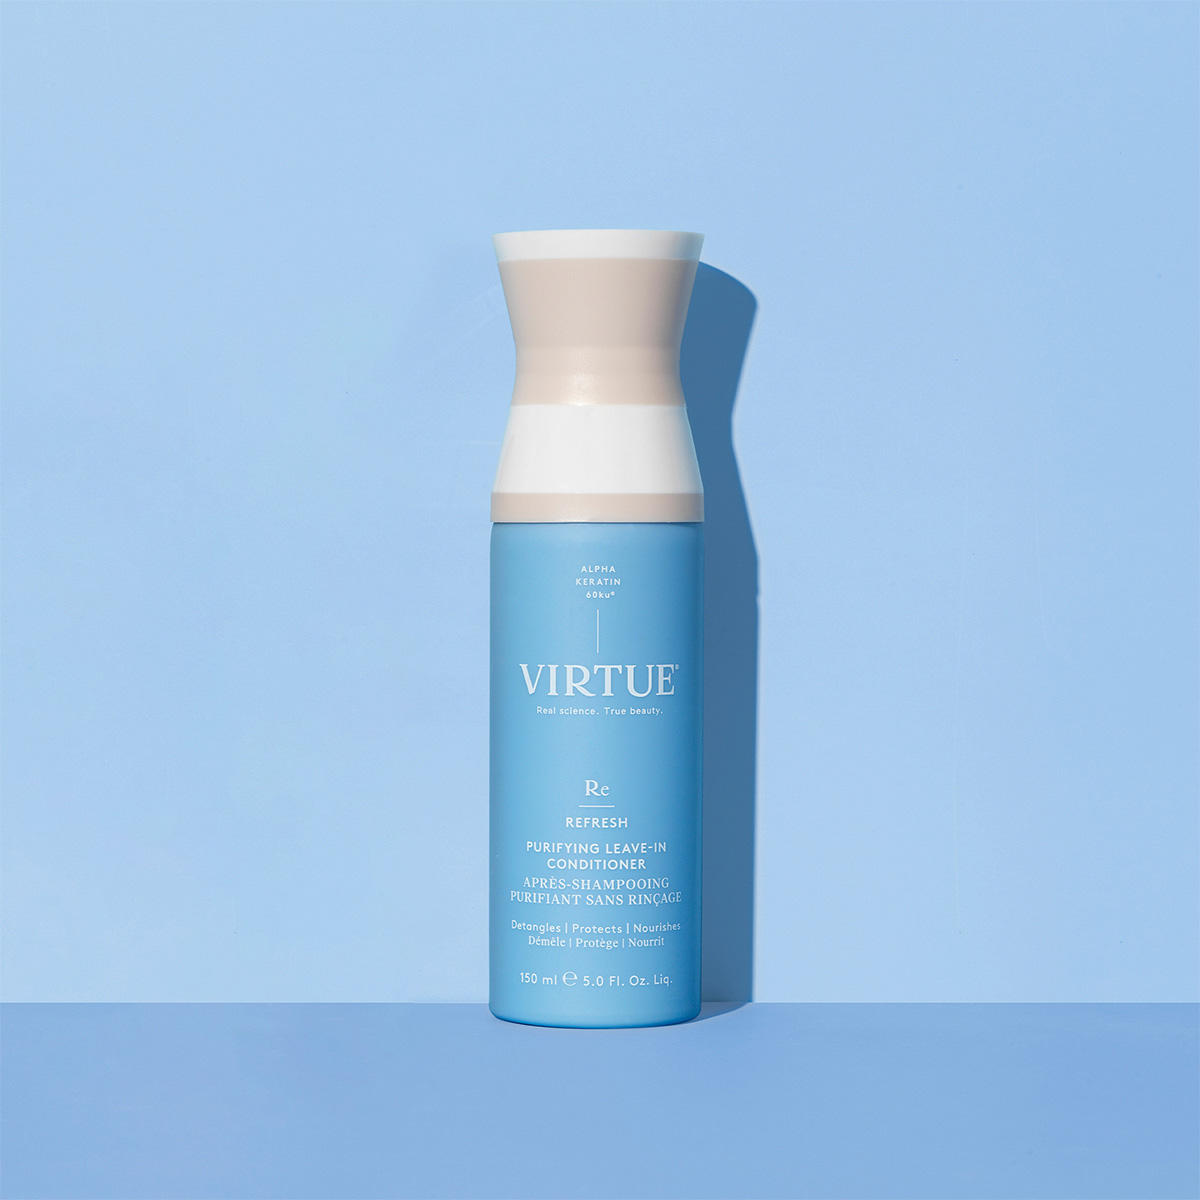 Virtue Refresh Purifying Leave-In Conditioner 150 ml - 5